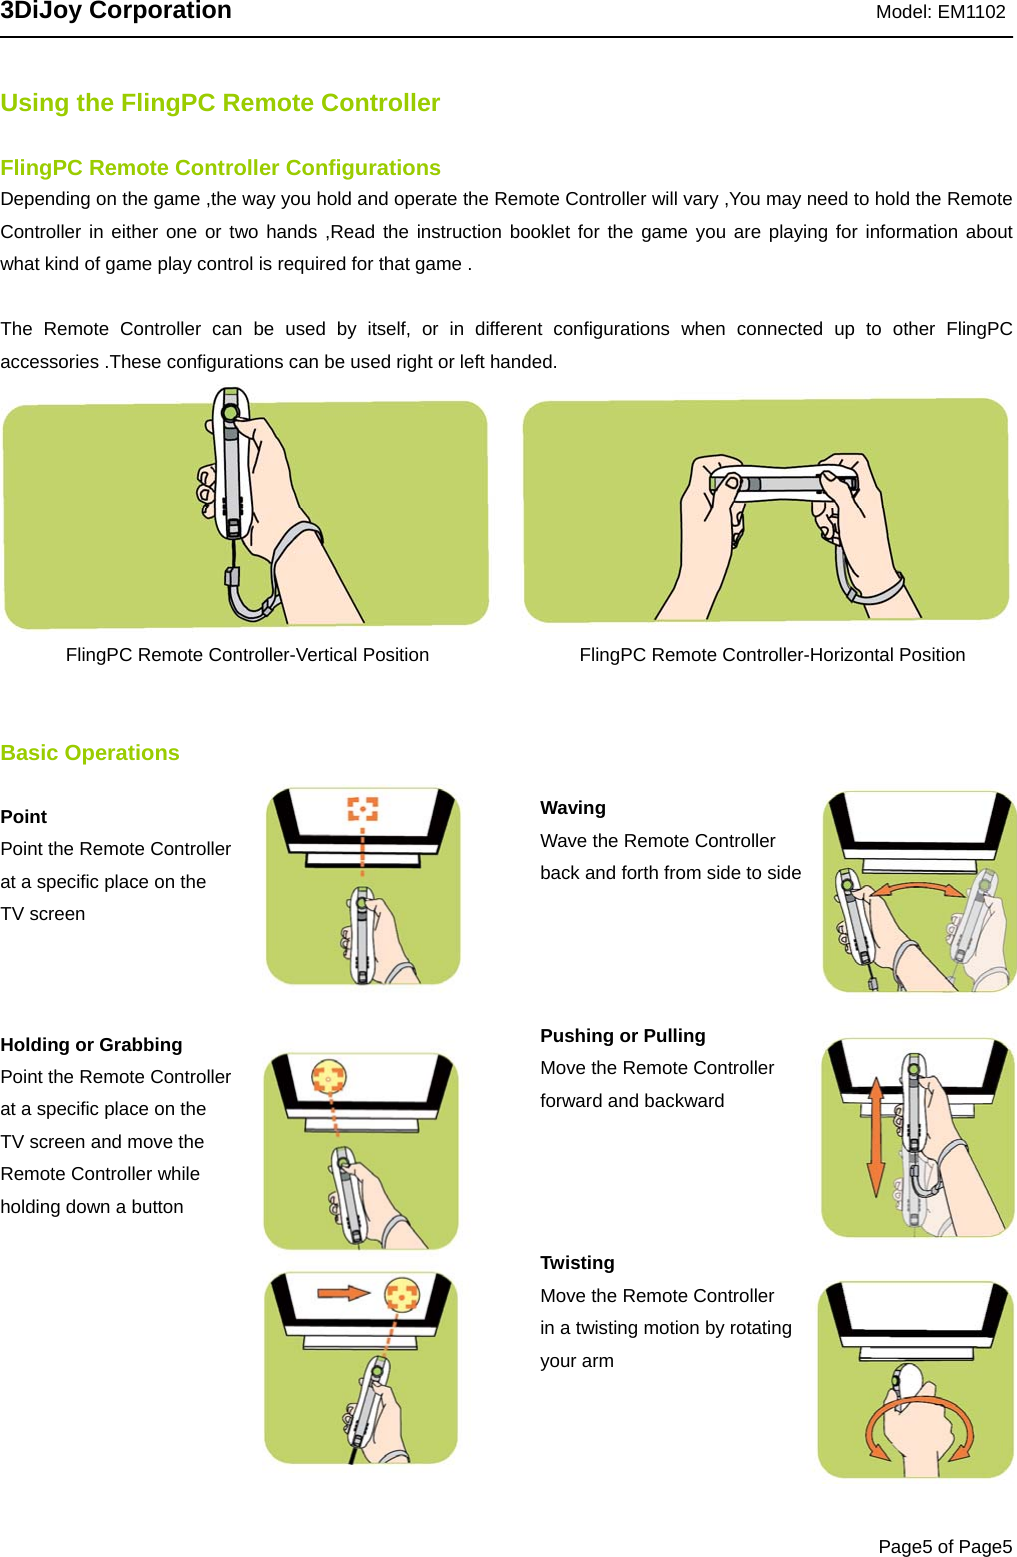 3DiJoy Corporation                                                               Model: EM1102   Page5 of Page5  Using the FlingPC Remote Controller  FlingPC Remote Controller Configurations   Depending on the game ,the way you hold and operate the Remote Controller will vary ,You may need to hold the Remote Controller in either one or two hands ,Read the instruction booklet for the game you are playing for information about  what kind of game play control is required for that game .  The Remote Controller can be used by itself, or in different configurations when connected up to other FlingPC accessories .These configurations can be used right or left handed.         FlingPC Remote Controller-Vertical Position                FlingPC Remote Controller-Horizontal Position    Basic Operations  Point Point the Remote Controller   at a specific place on the   TV screen      Holding or Grabbing Point the Remote Controller   at a specific place on the   TV screen and move the Remote Controller while   holding down a button           Waving Wave the Remote Controller back and forth from side to side       Pushing or Pulling Move the Remote Controller   forward and backward       Twisting Move the Remote Controller   in a twisting motion by rotating your arm   